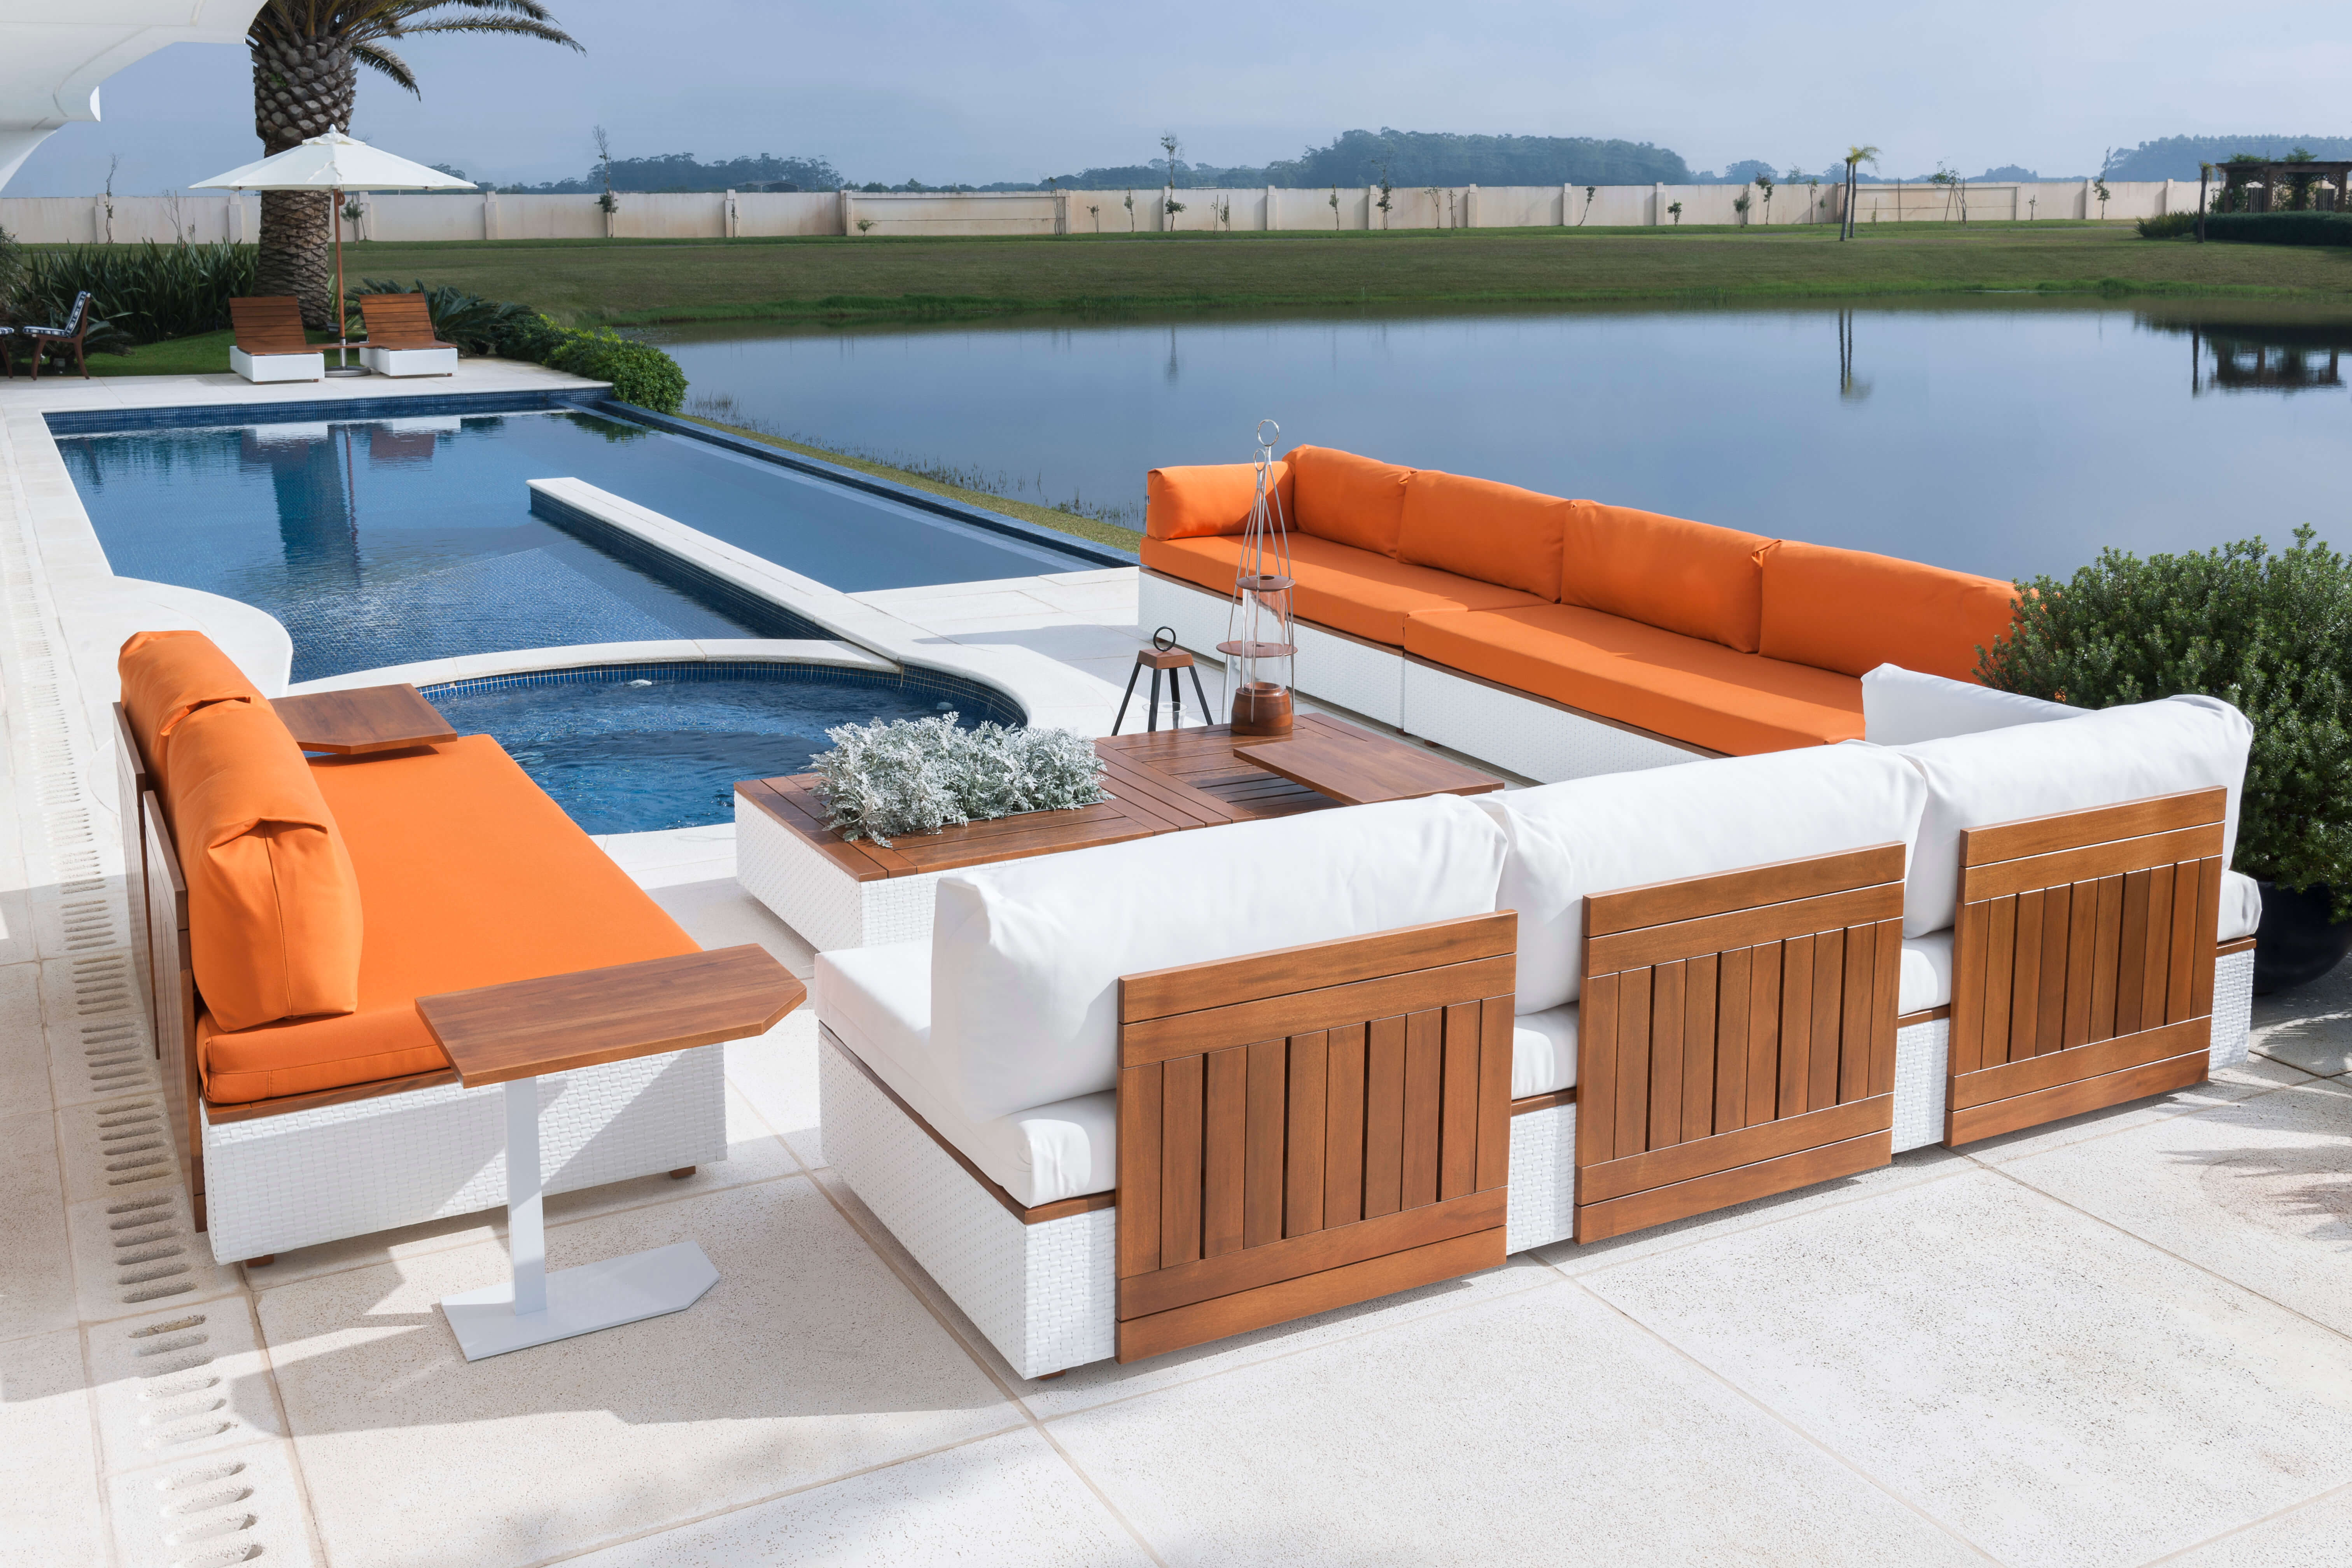 Pier collection by saccaro